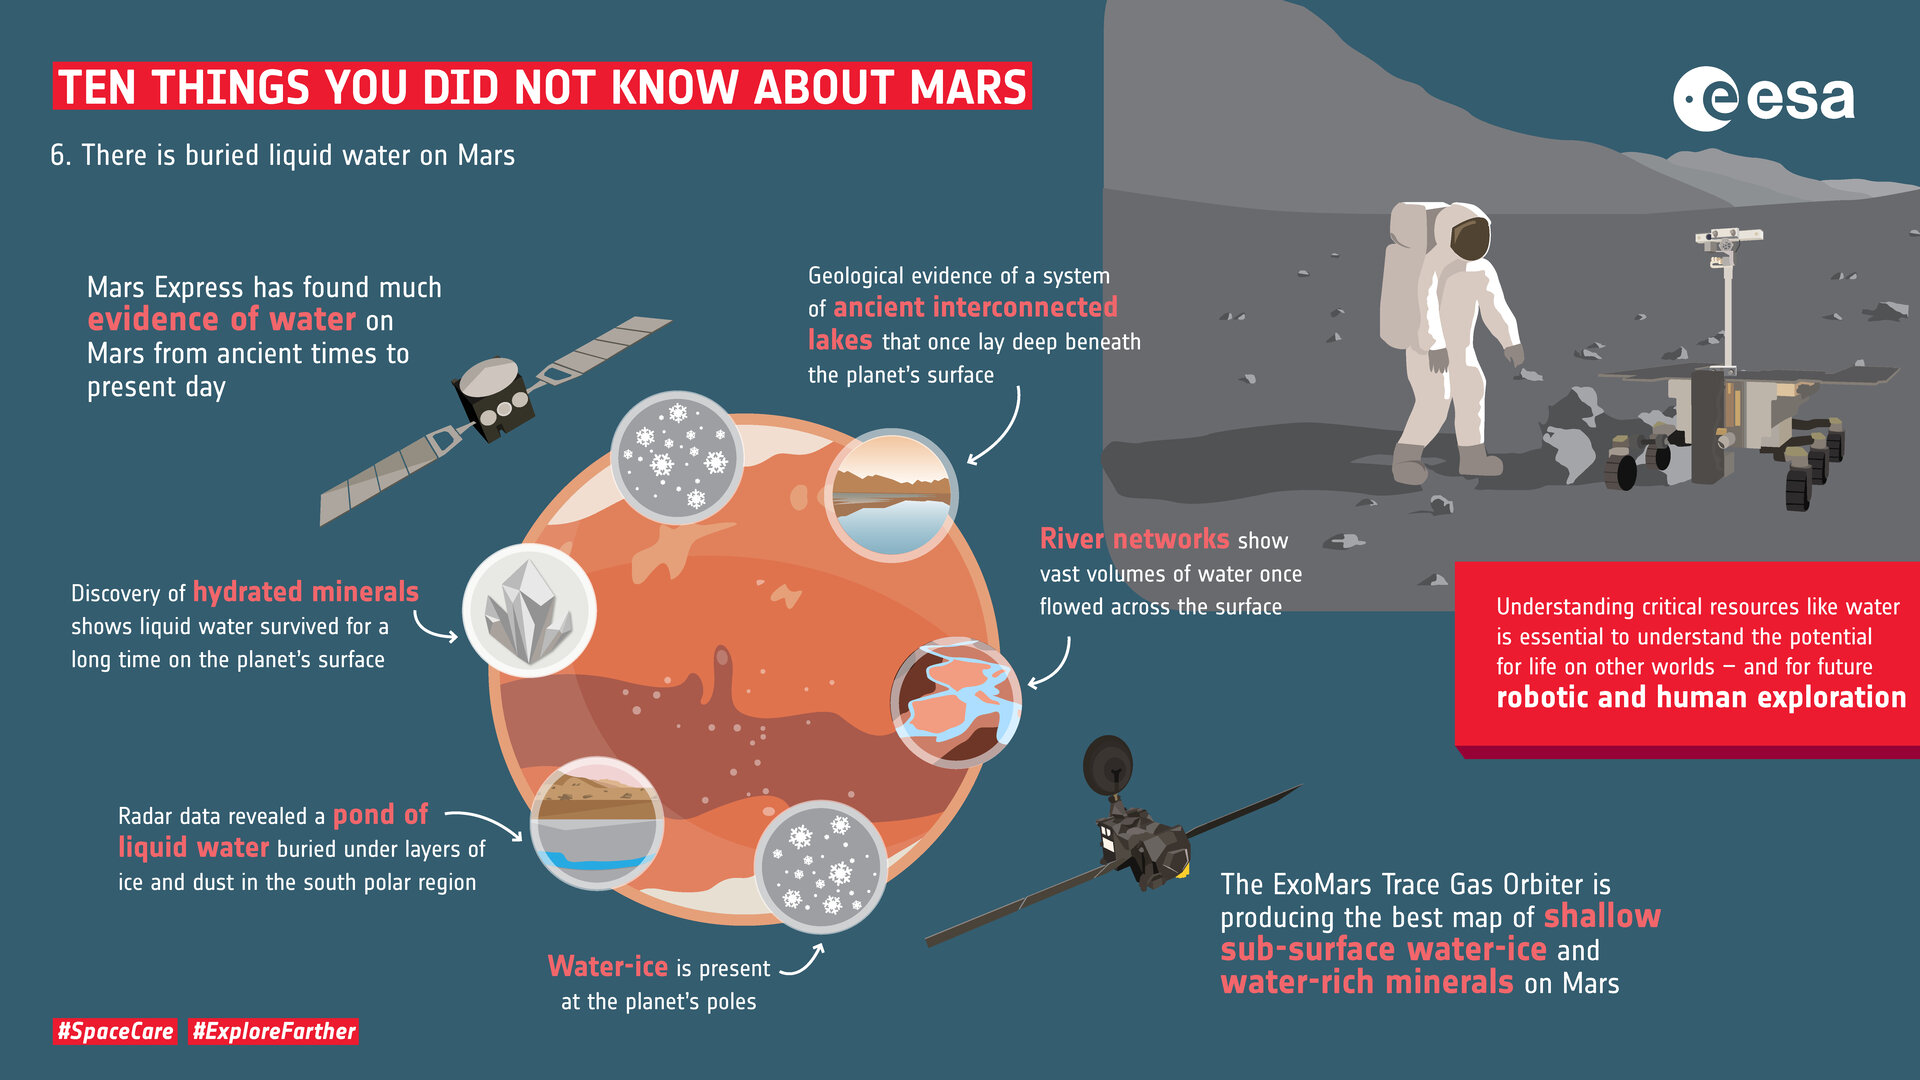 Ten things you did not know about Mars: 6. Water